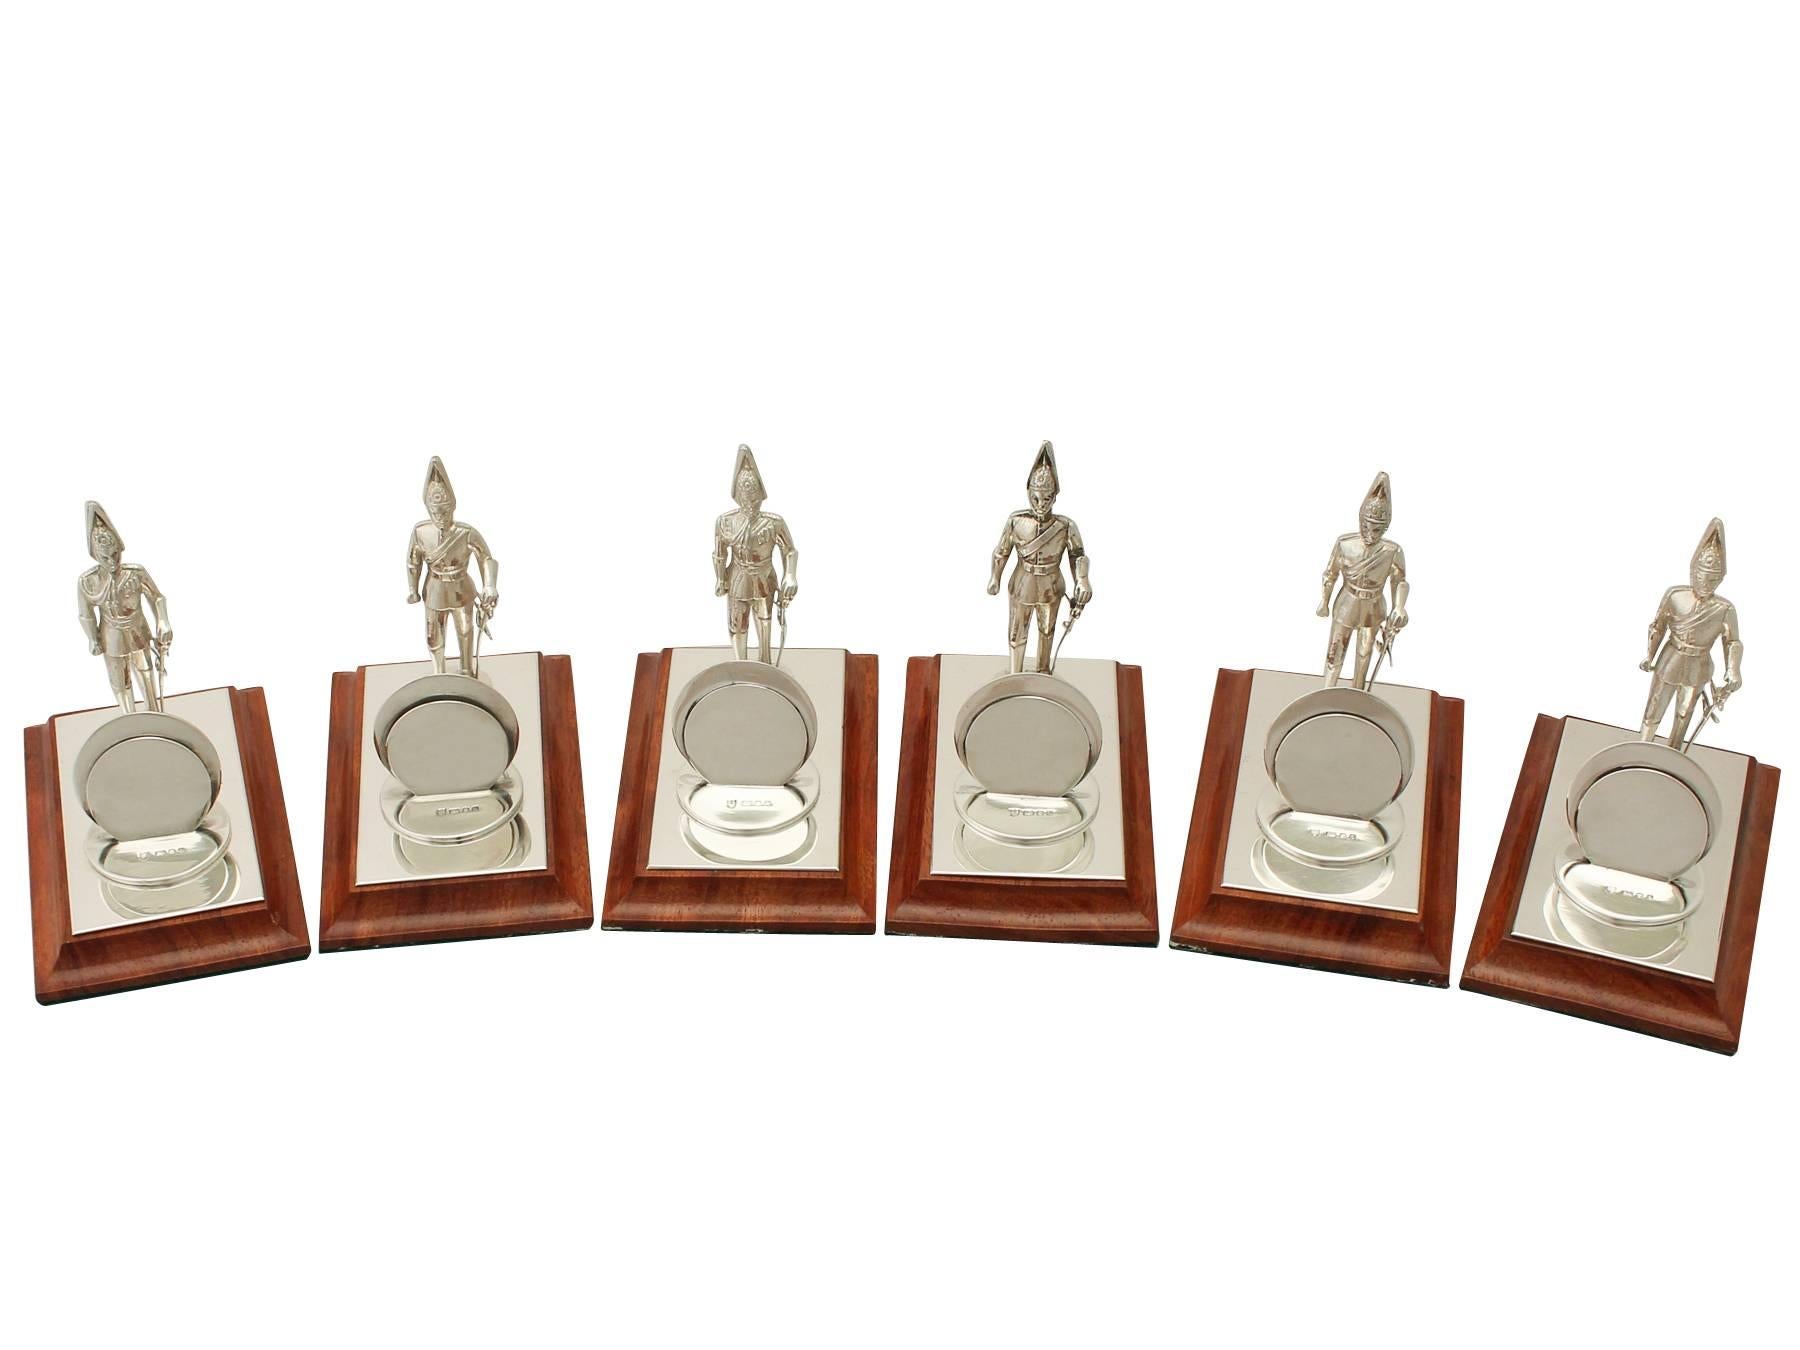 An exceptional, fine and impressive set of six vintage Elizabeth II English sterling silver and wood menu holders with military interest; an addition to our dining silverware collection.

These exceptional vintage Elizabeth II sterling silver menu